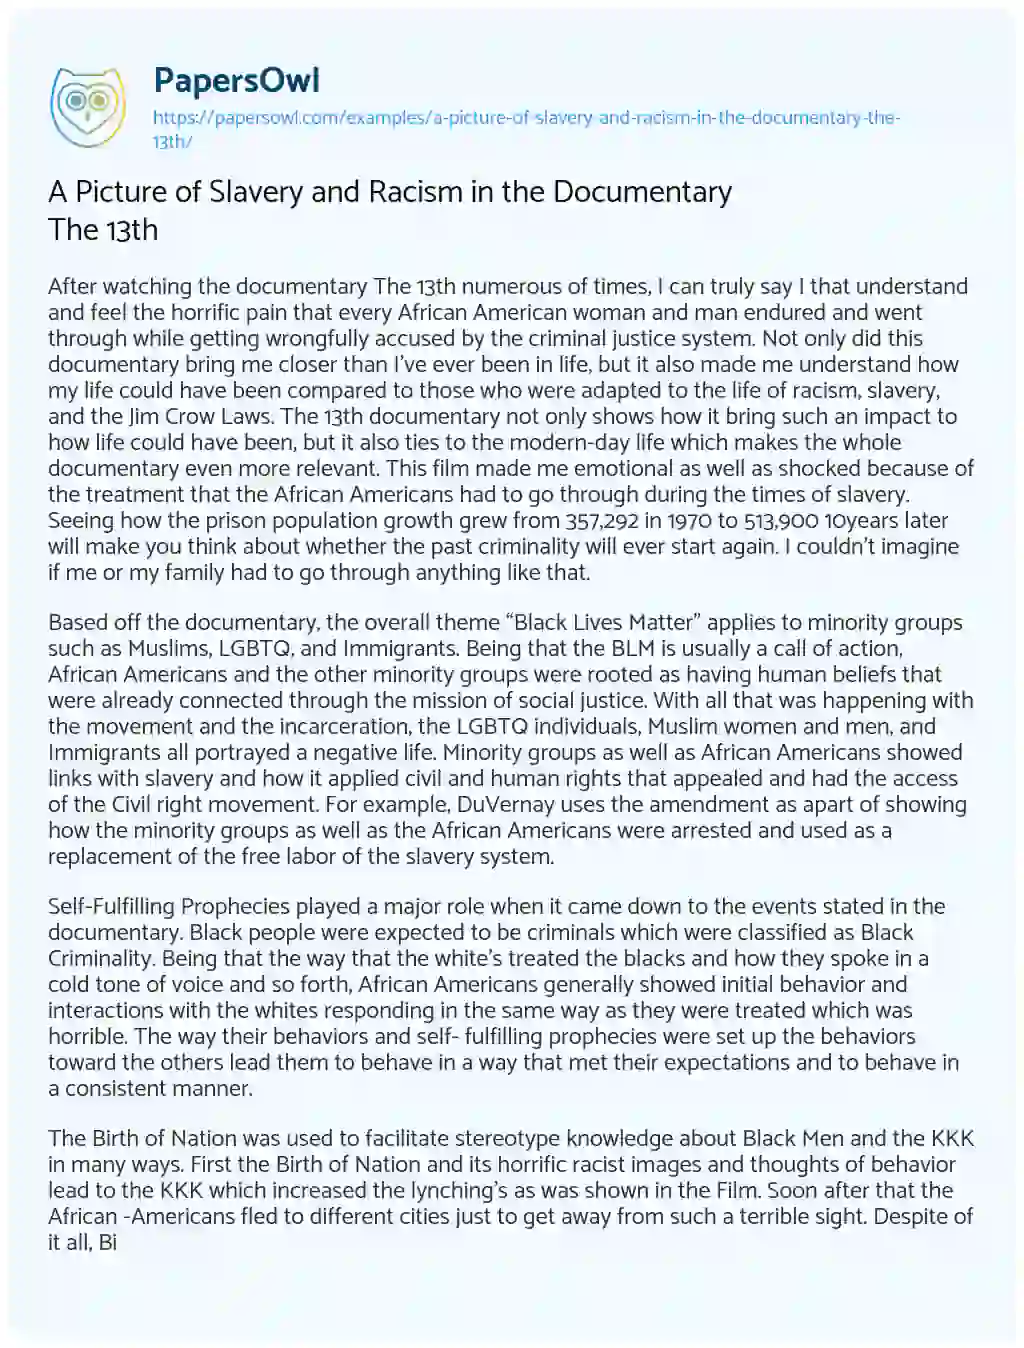 Essay on A Picture of Slavery and Racism in the Documentary the 13th